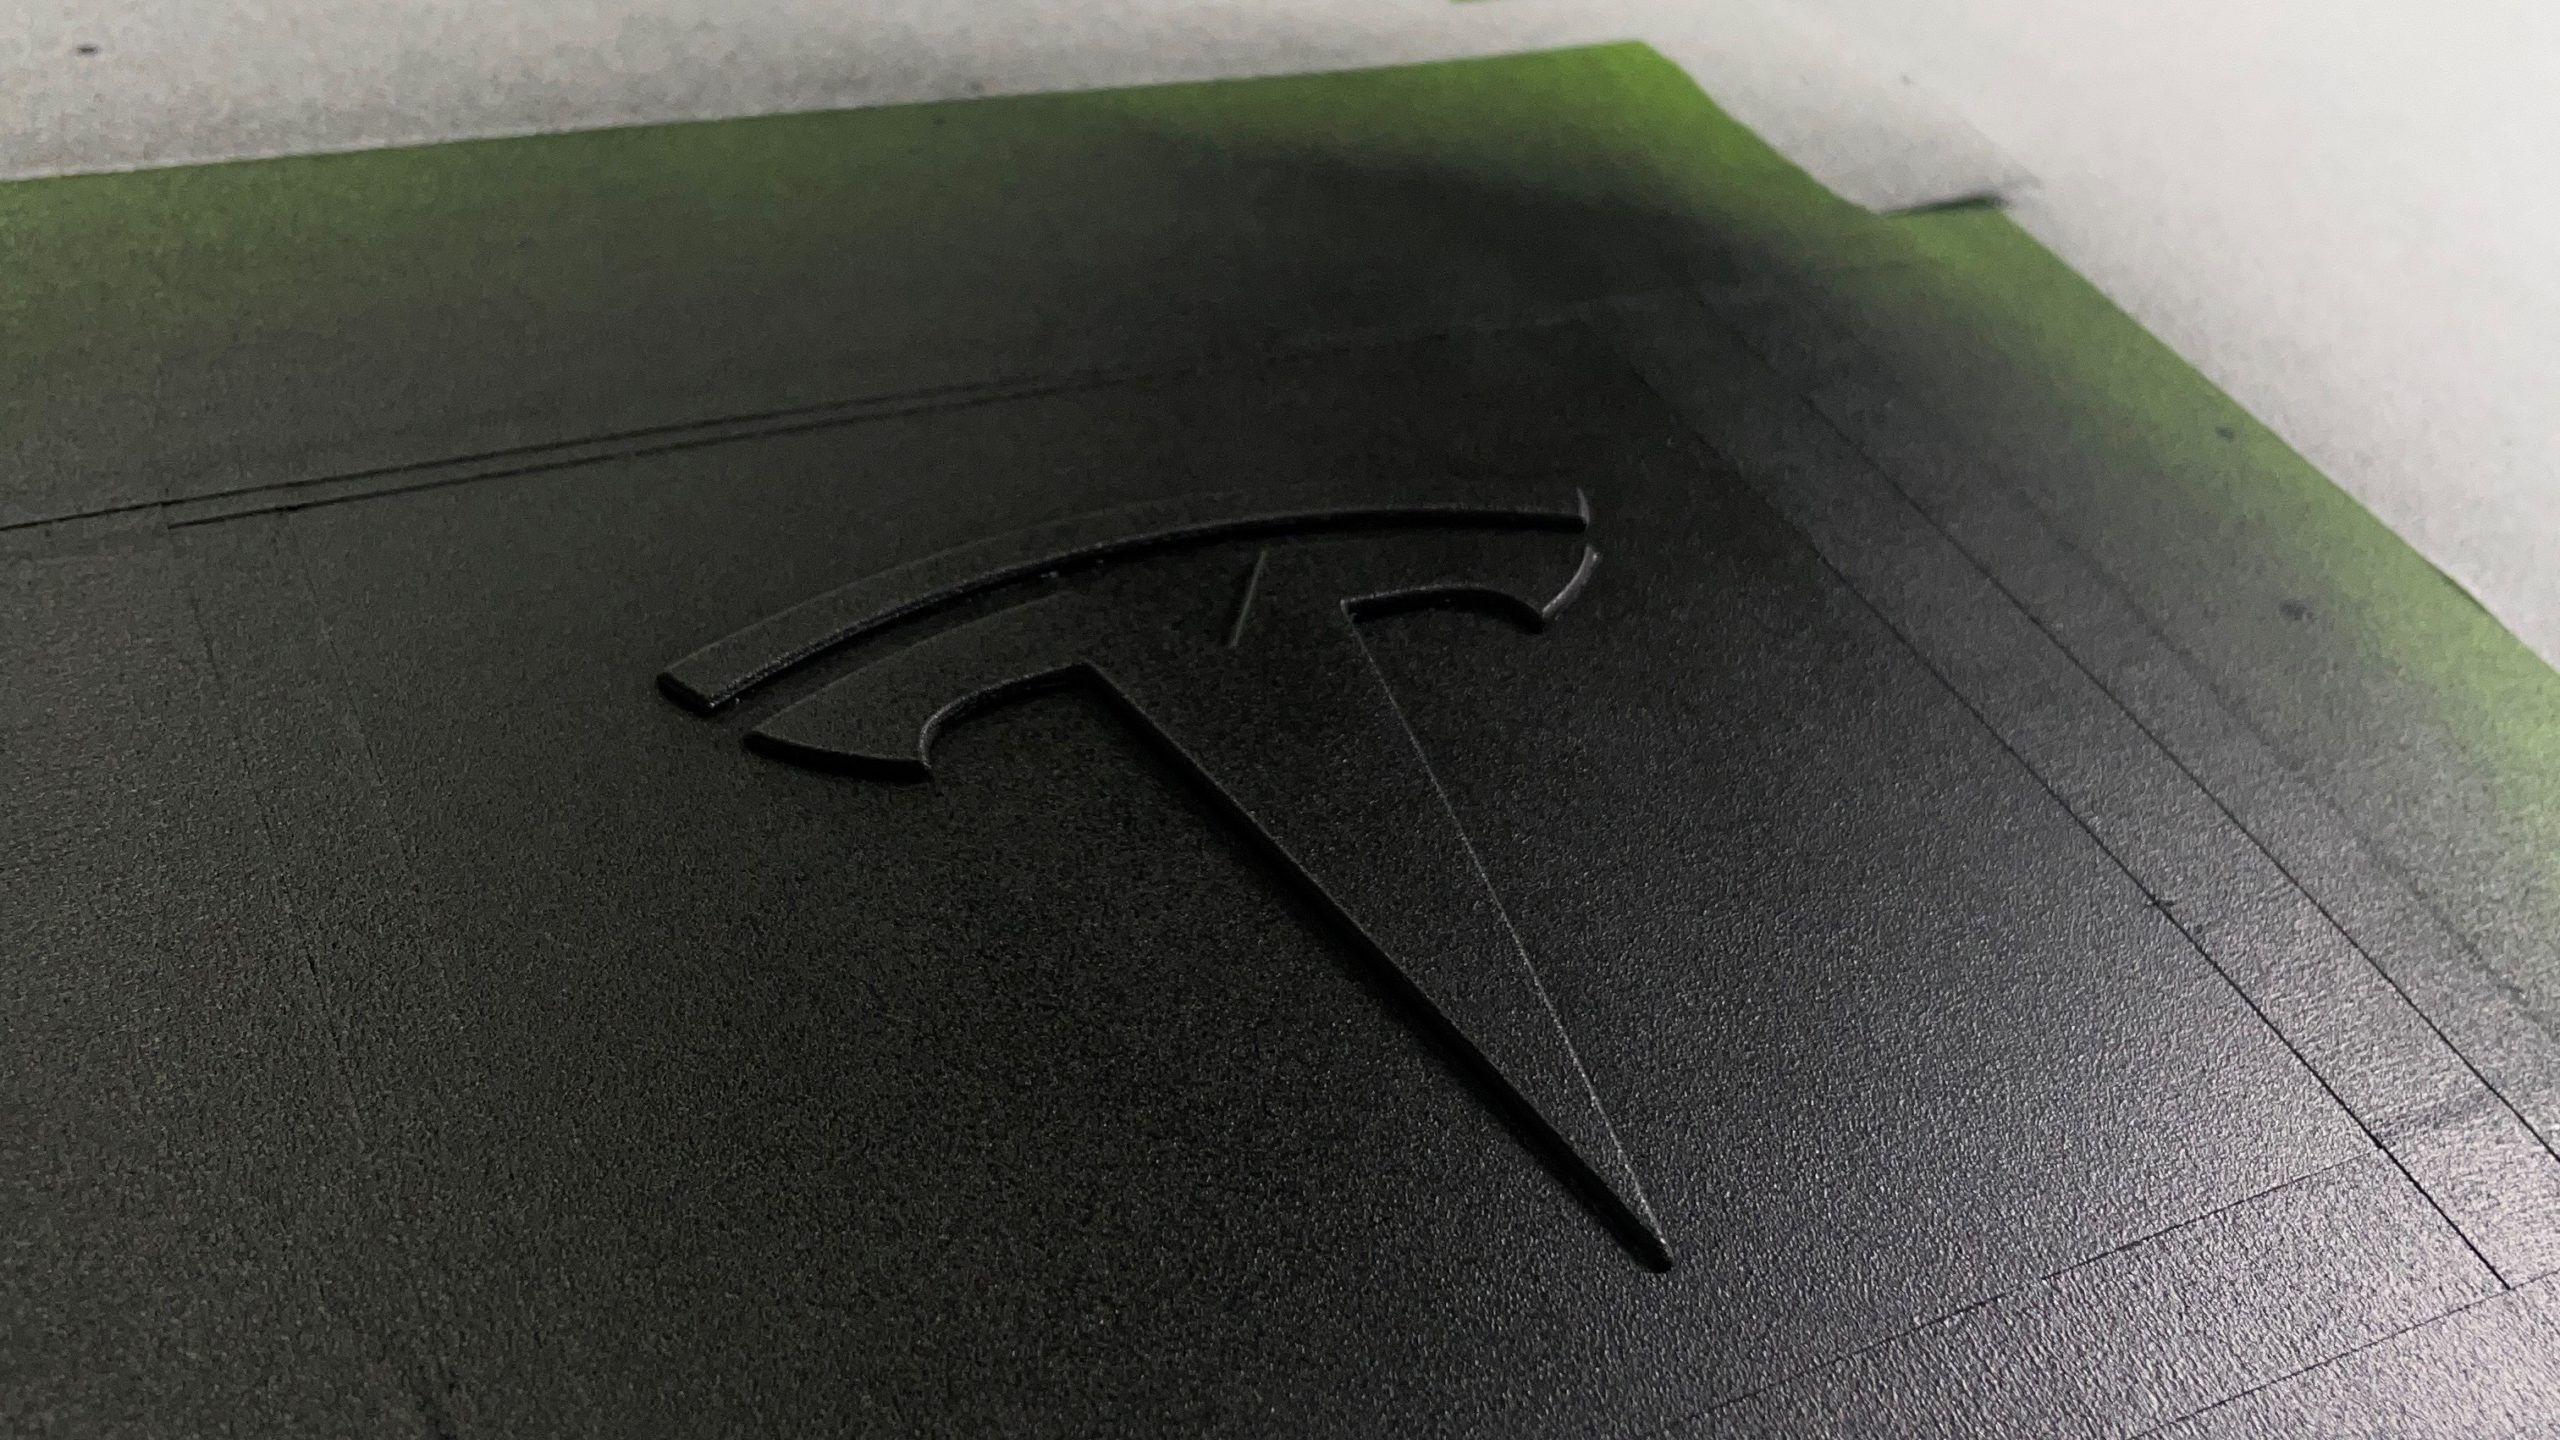 How to Plasti Dip Emblems/Logos on Your Tesla – Step by Step Guide